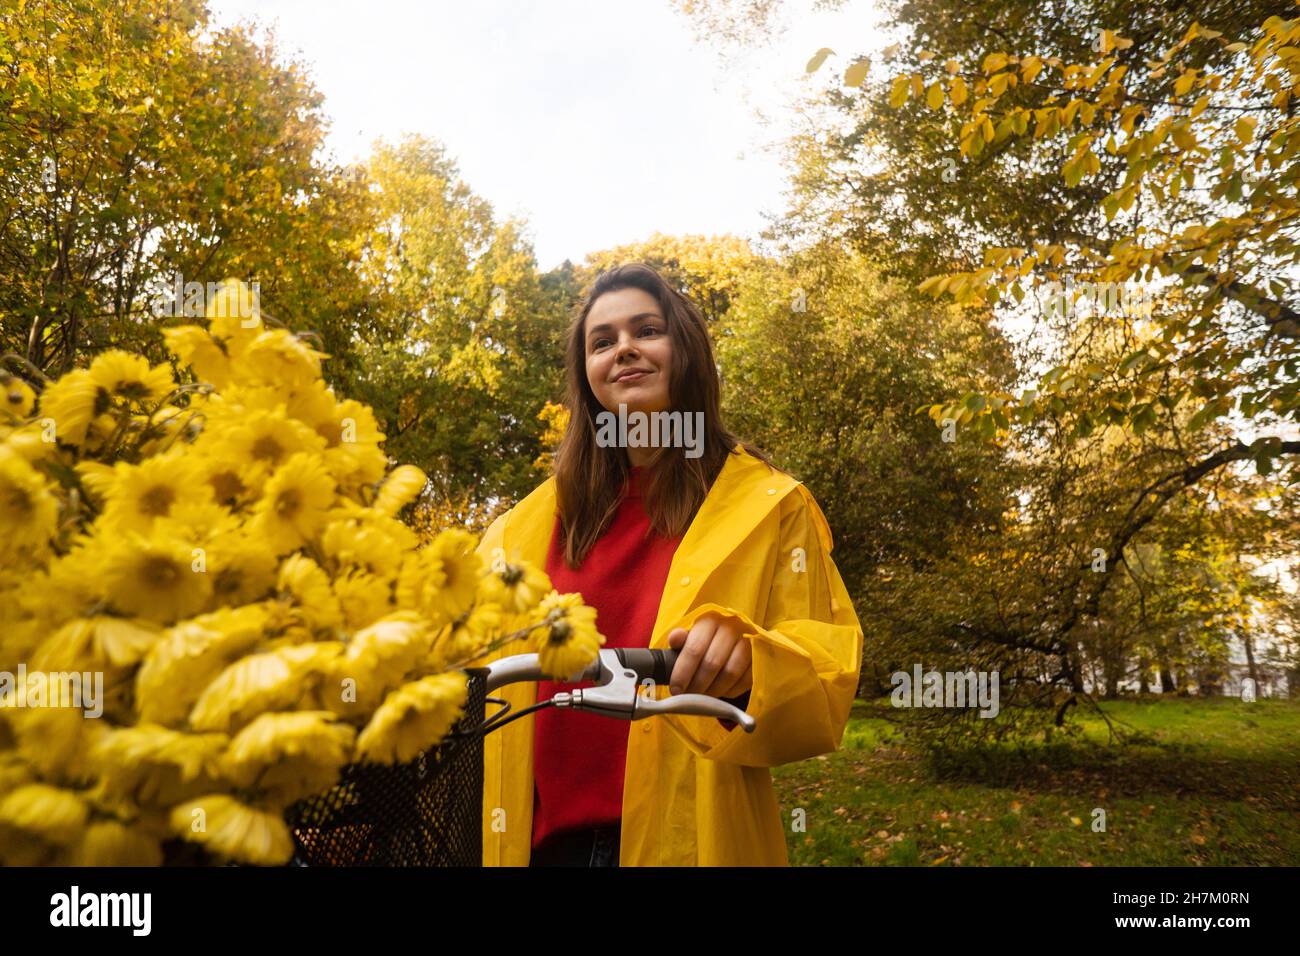 Smiling woman with yellow flowers on bicycle in park Stock Photo